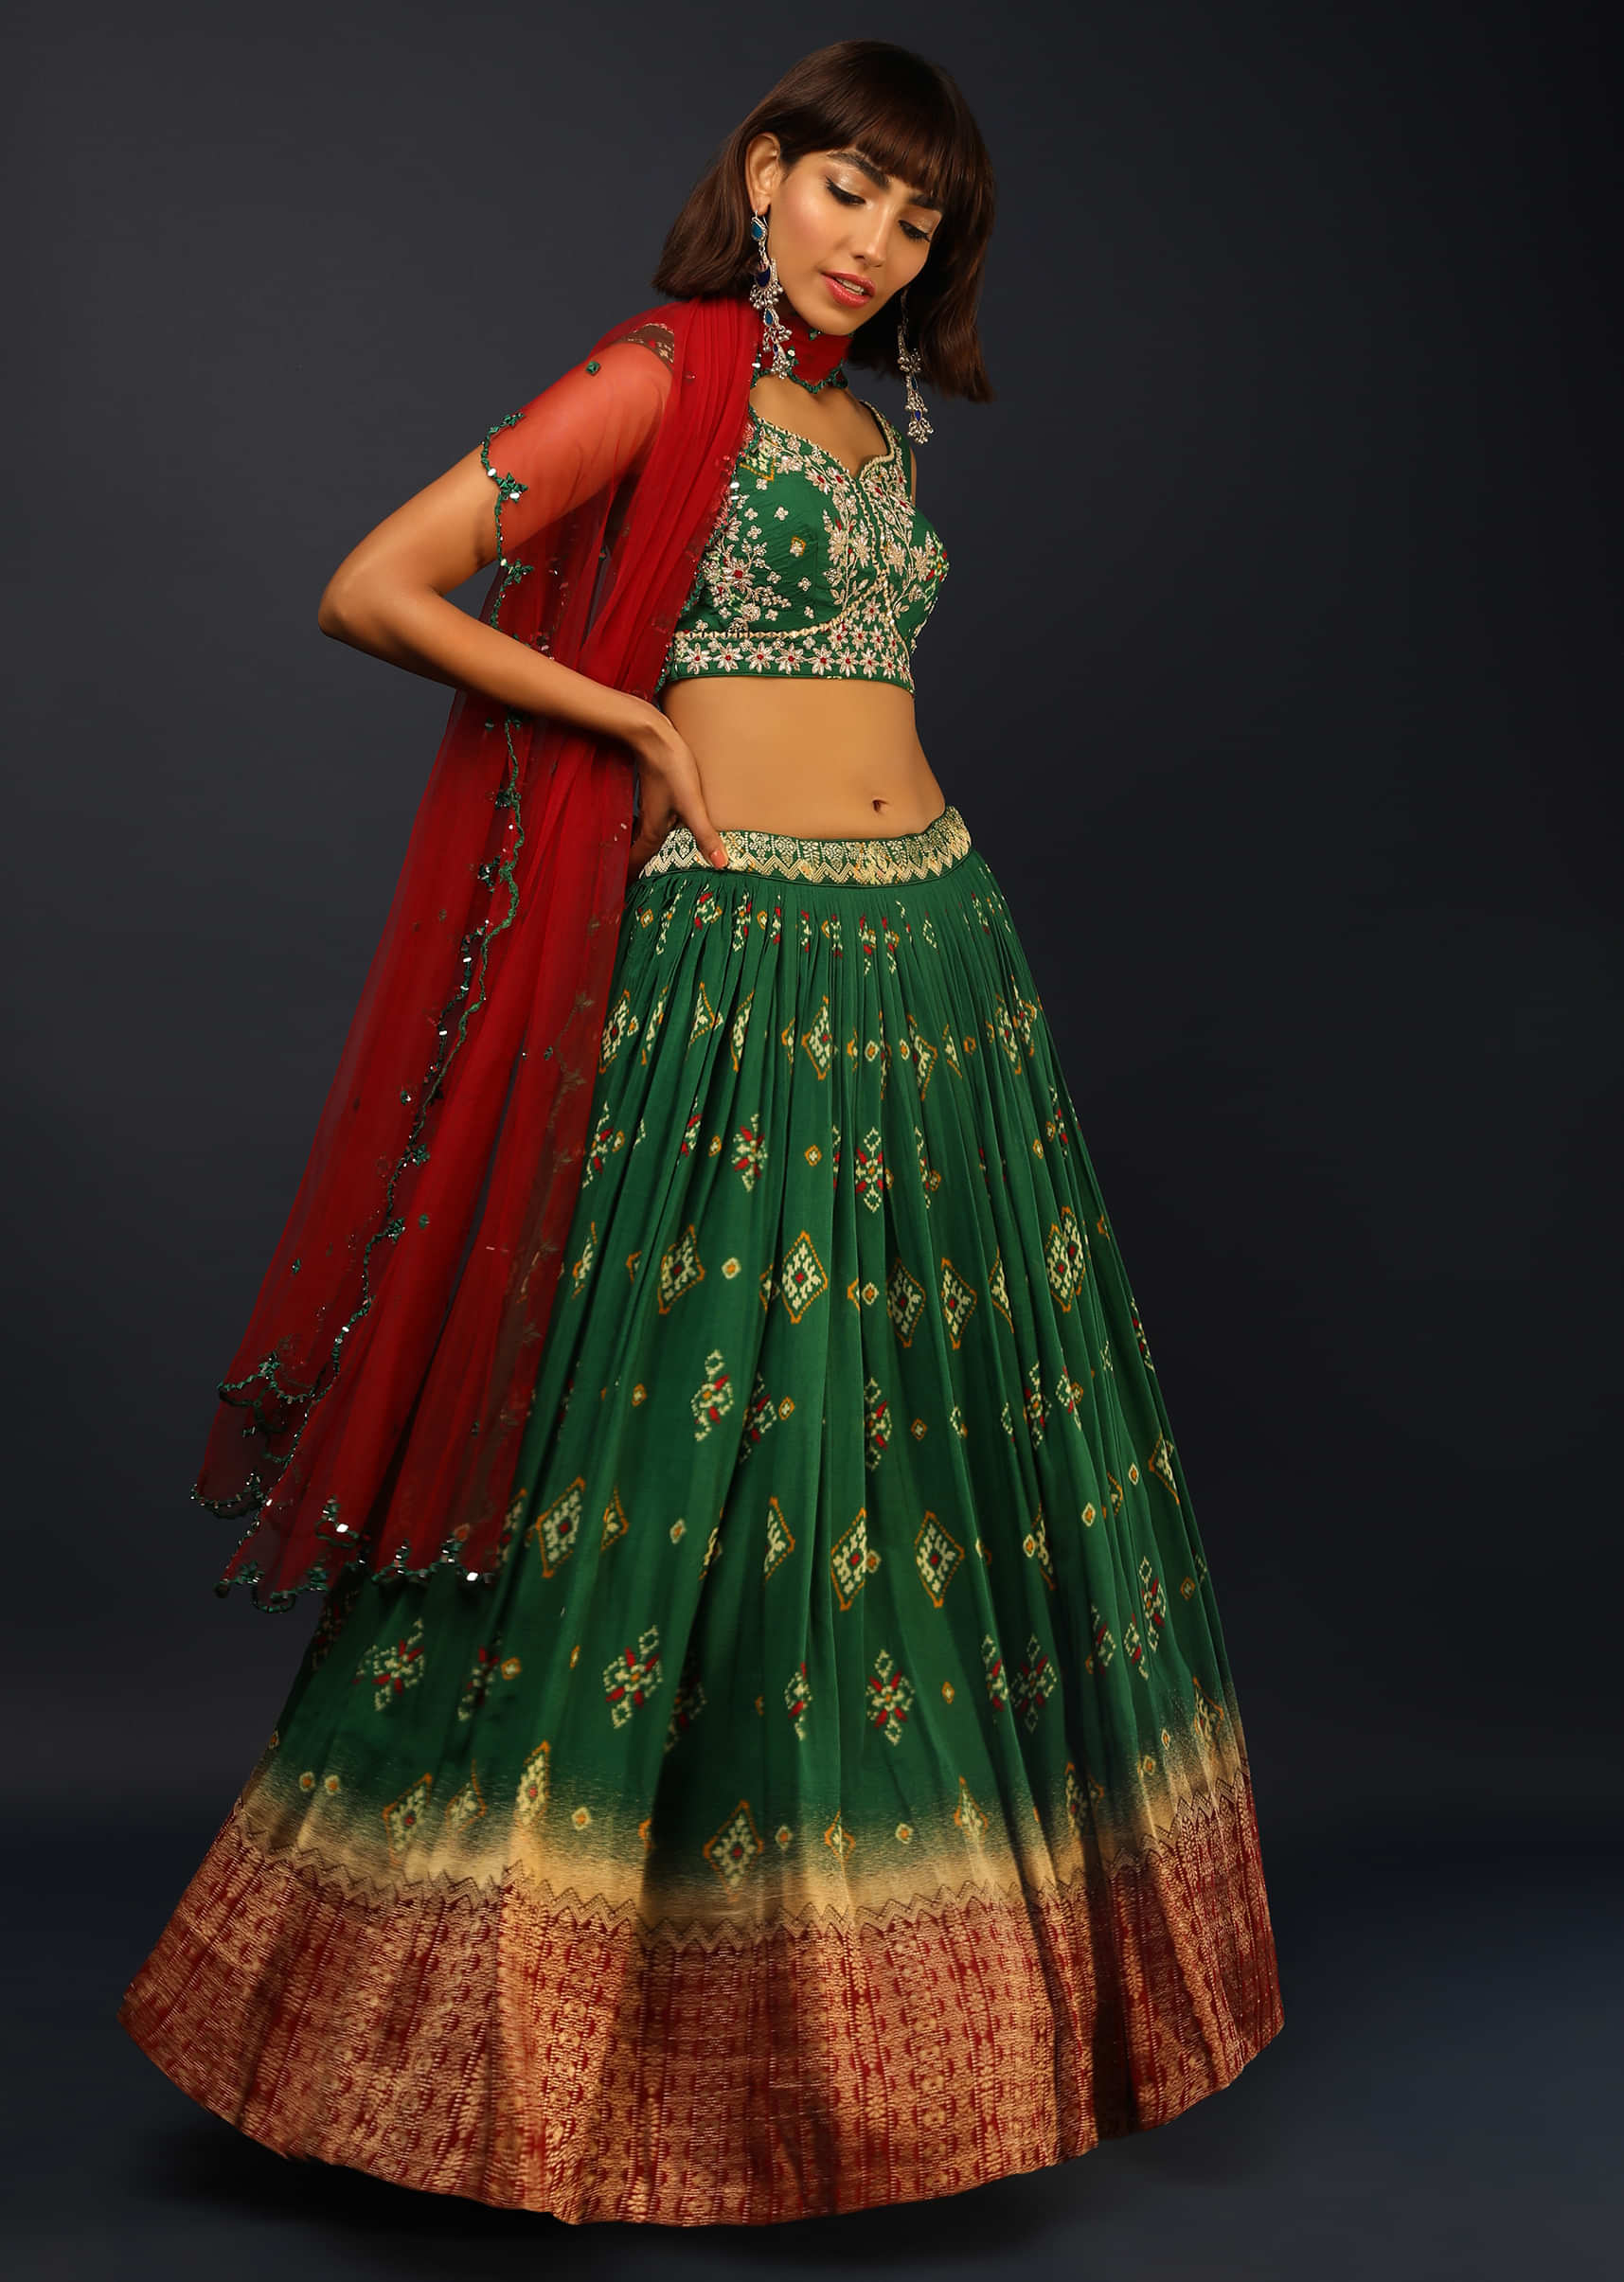 Bottle Green Lehenga In Silk With Patola Printed Buttis And Woven Maroon Border 